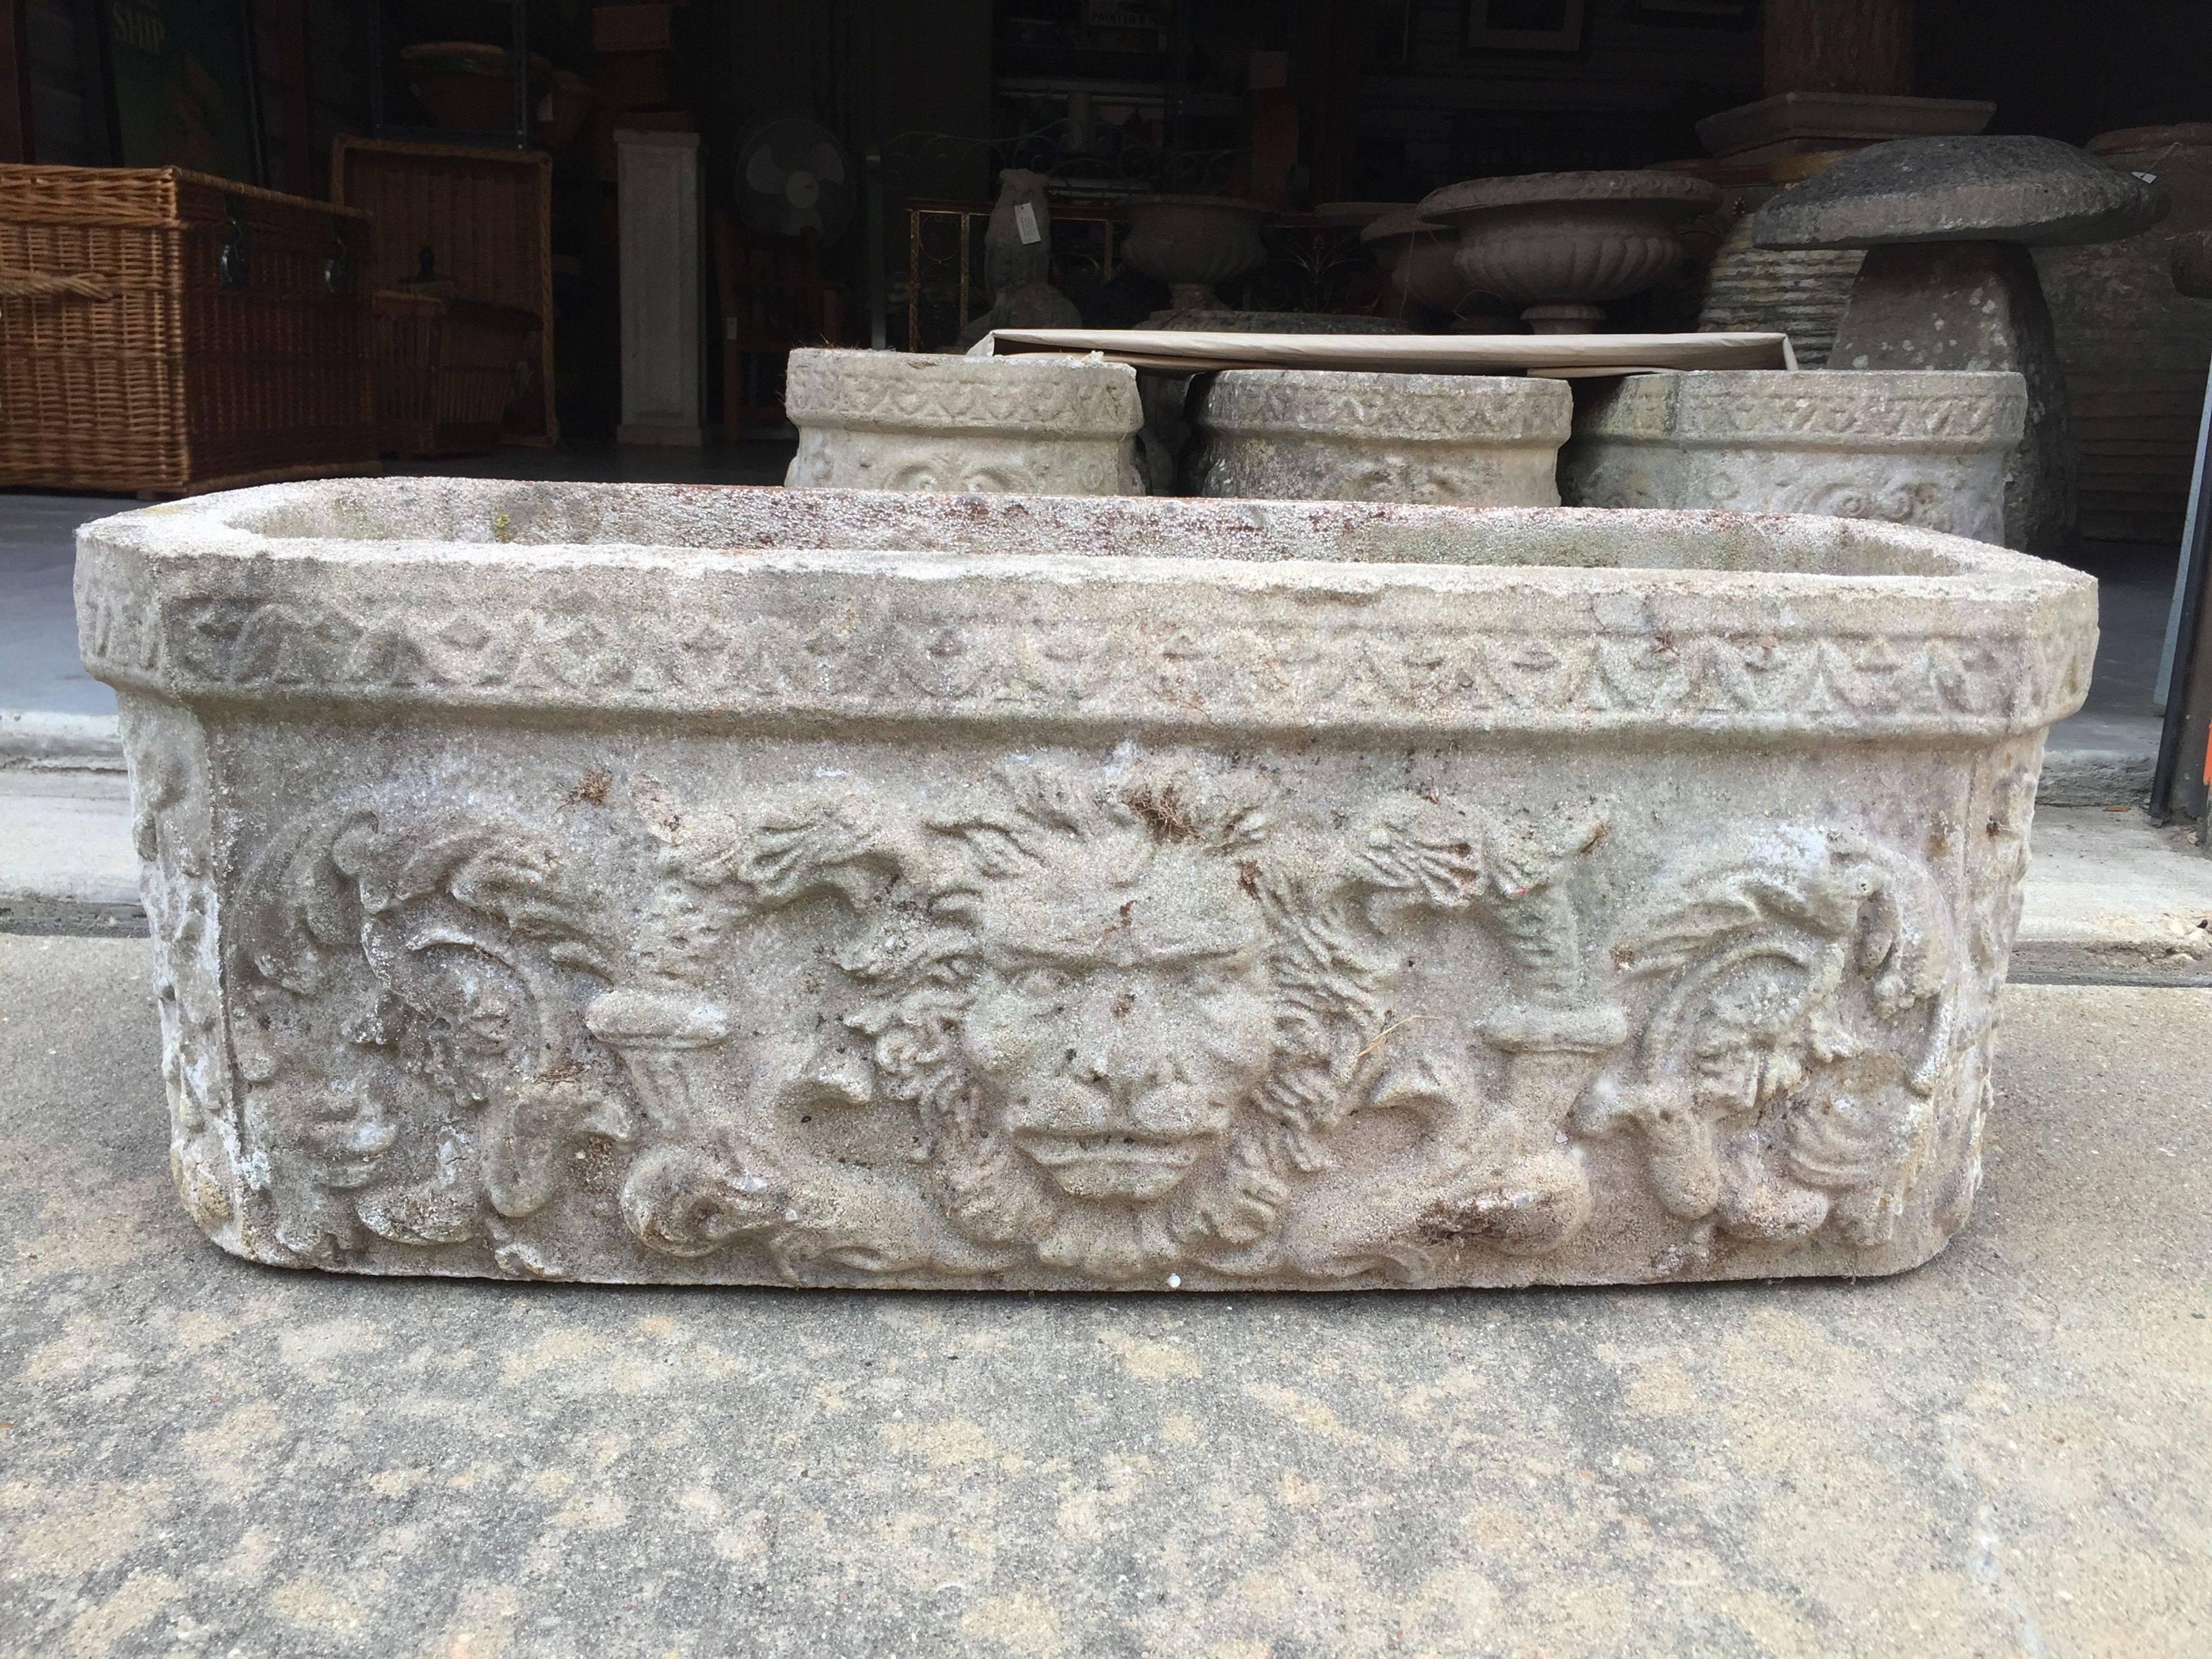 A selection of four large English garden troughs (or planters) of composition stone, each with Fine lion's mask relief detail to each long side and featuring a green man design on the opposing ends.

Dimensions: H 10